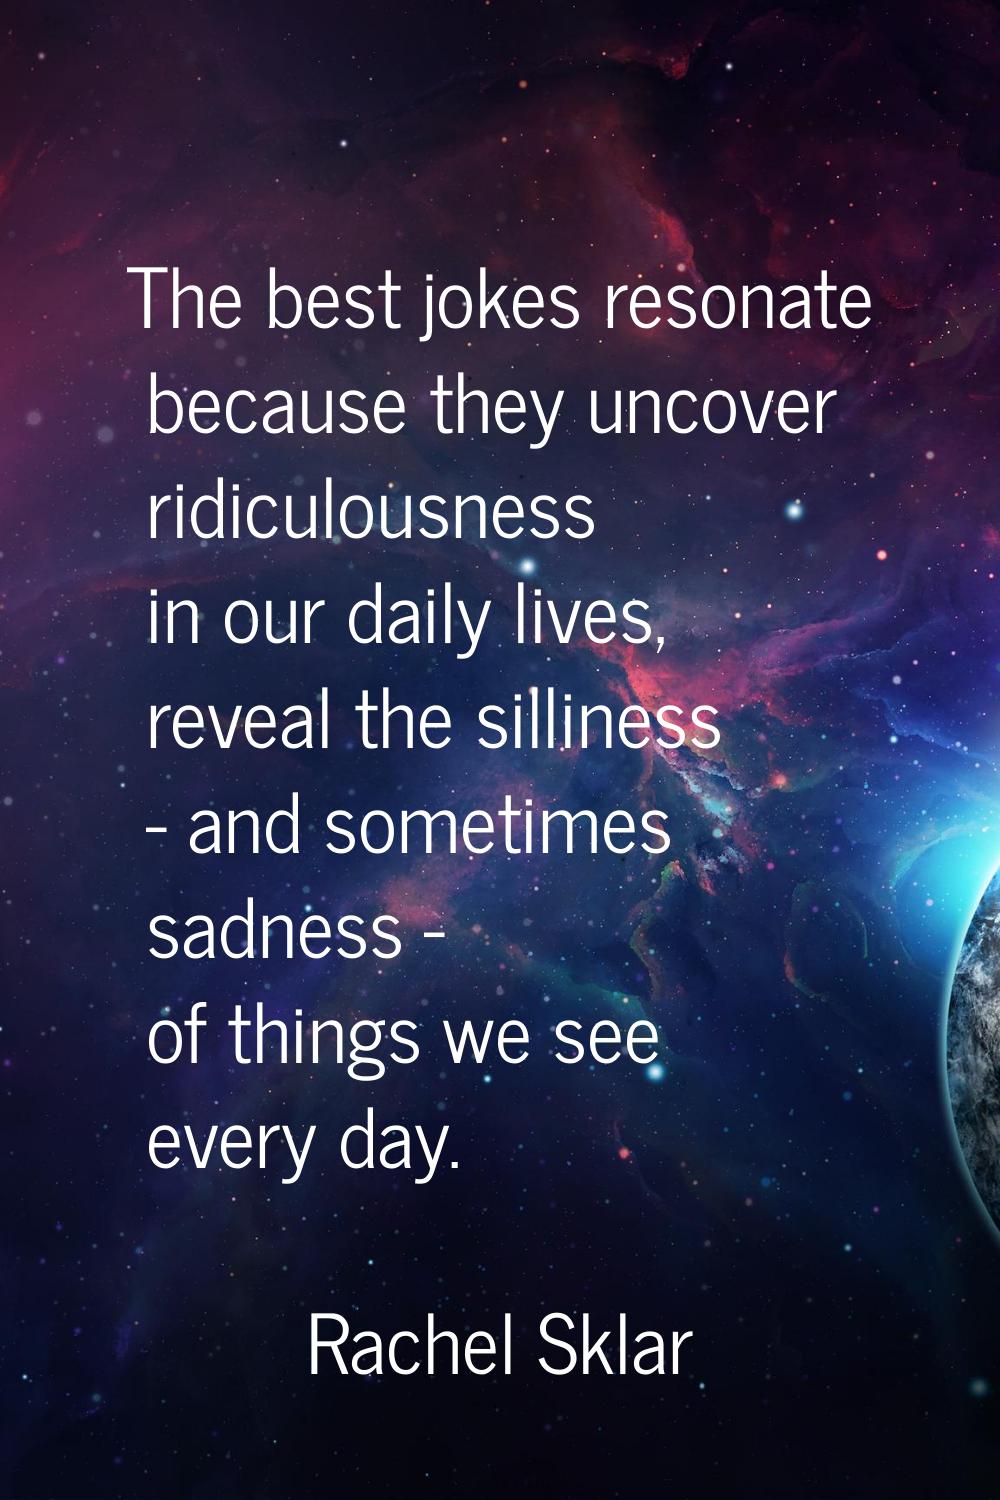 The best jokes resonate because they uncover ridiculousness in our daily lives, reveal the sillines